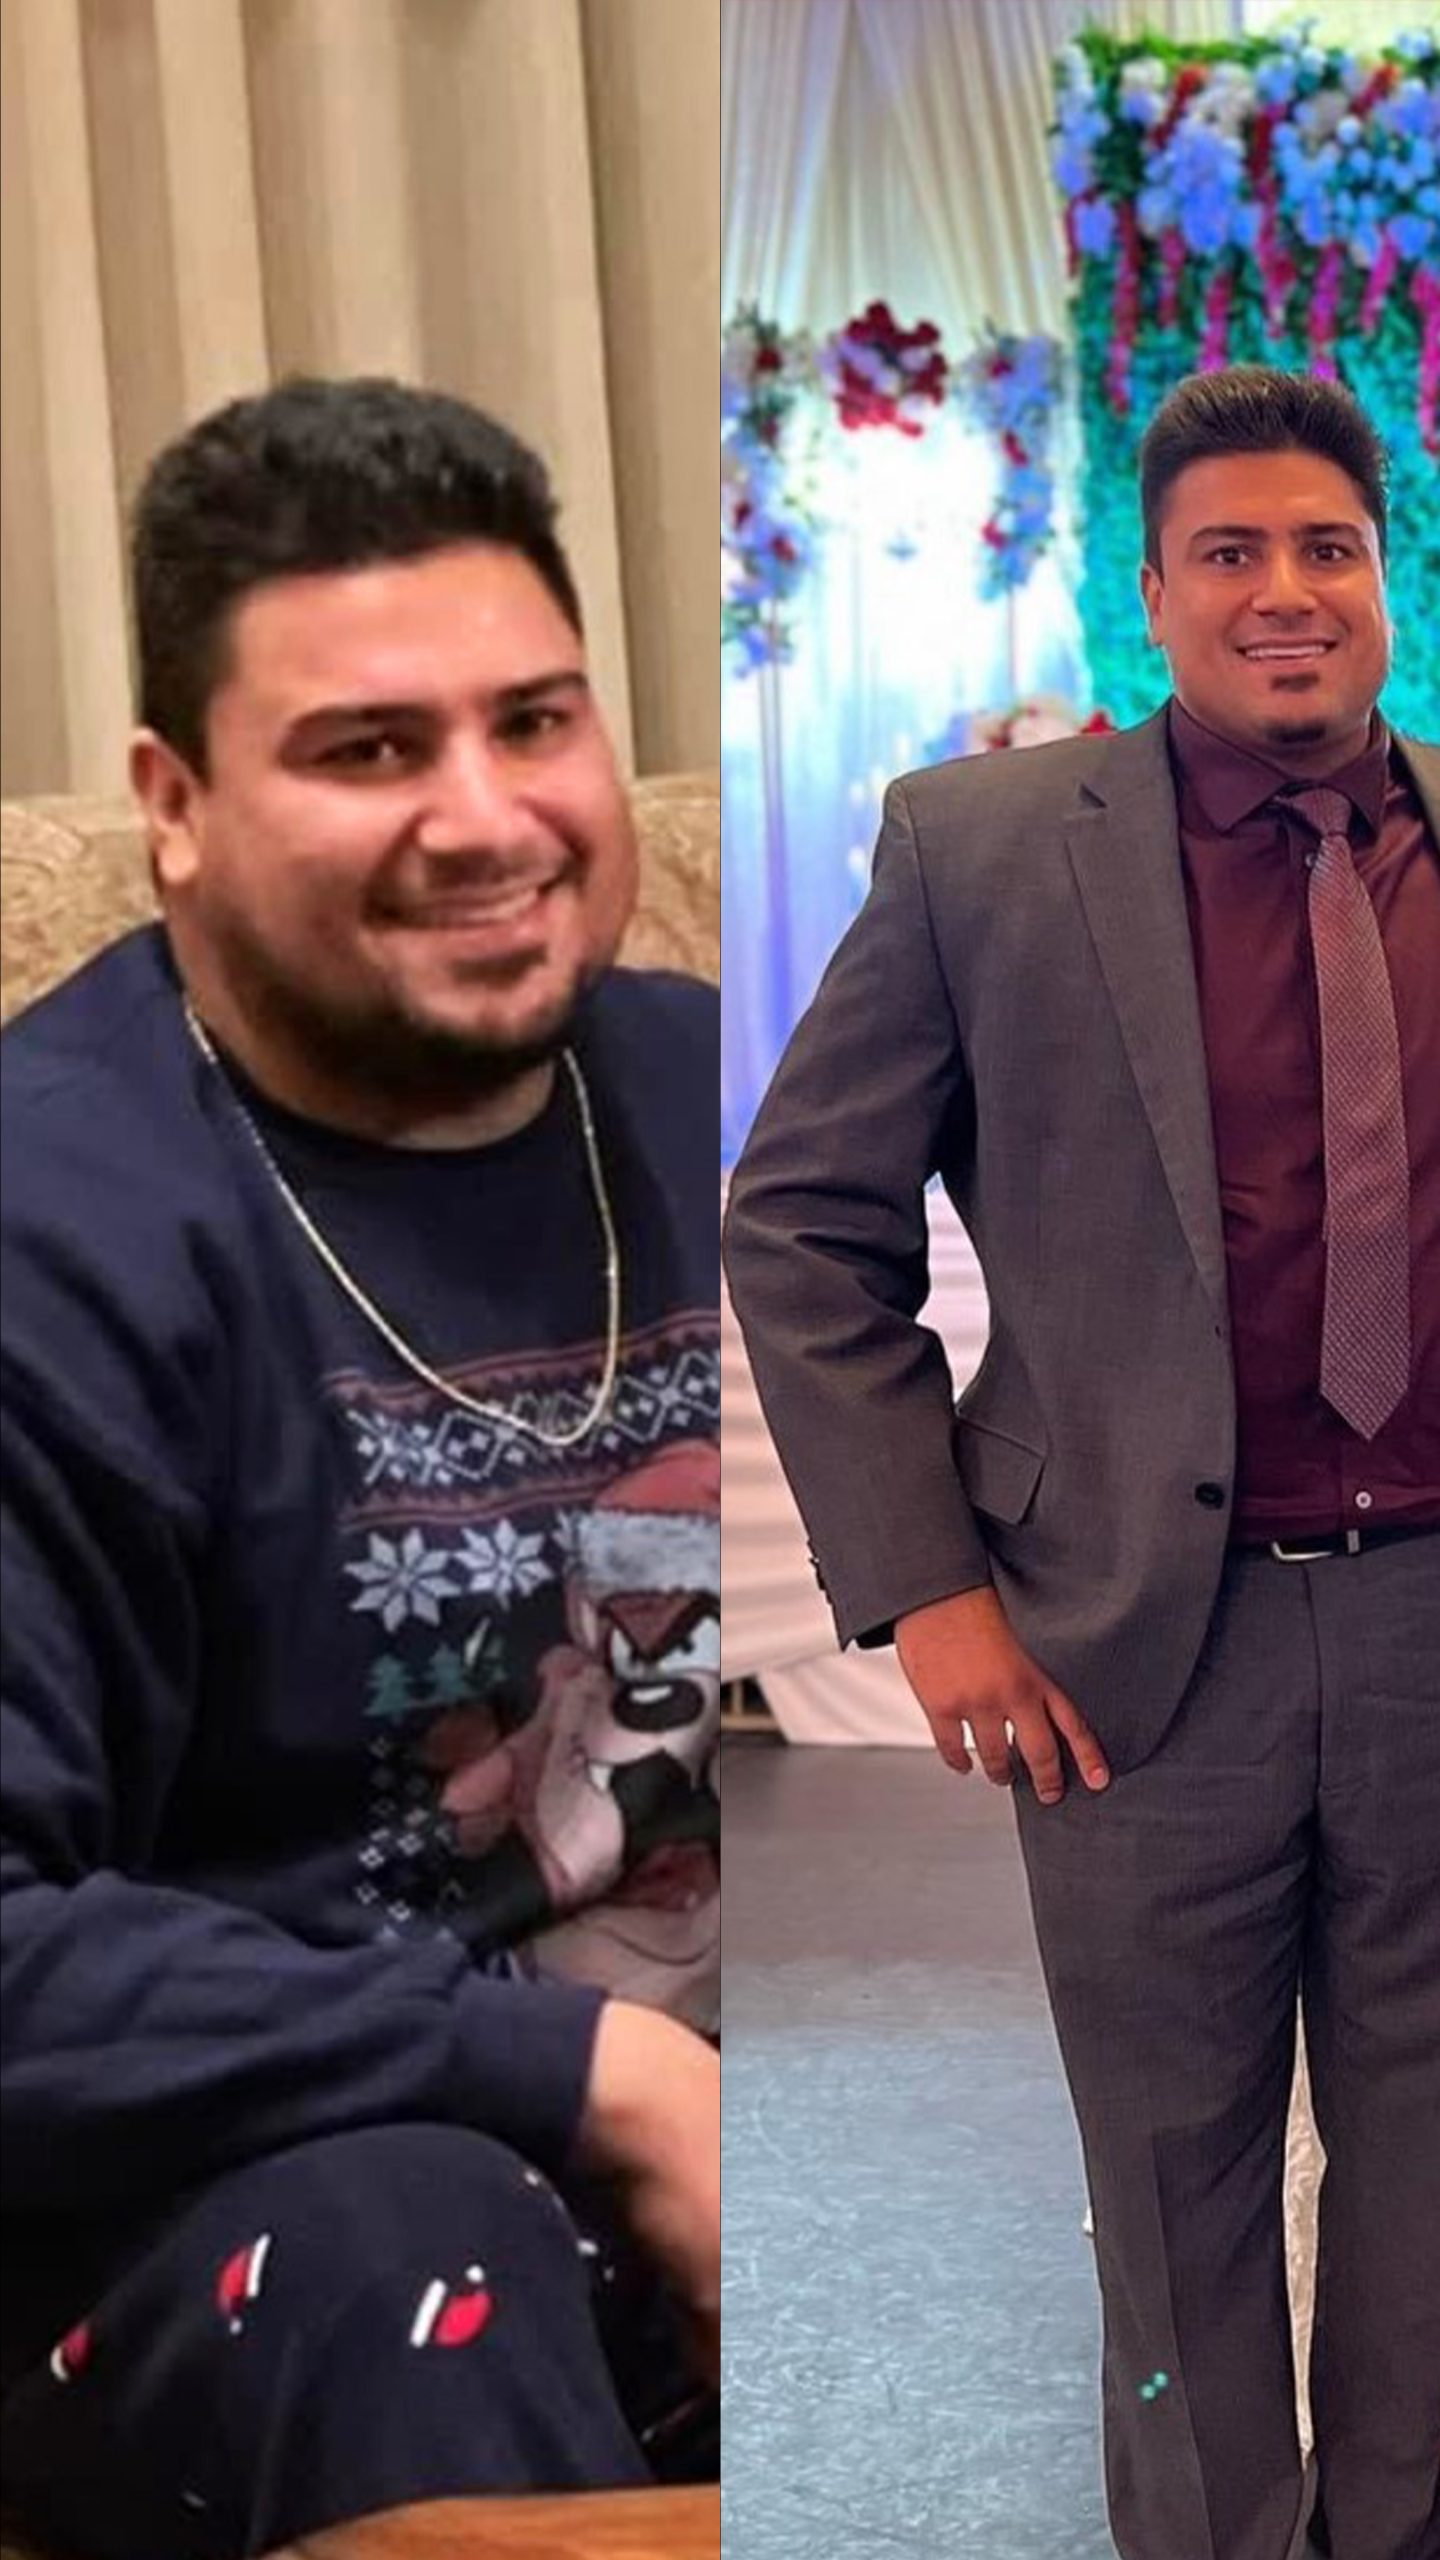 " In under a year of training with Rajiv I was able to lose around 38 pounds and lift more weight than I ever had. "